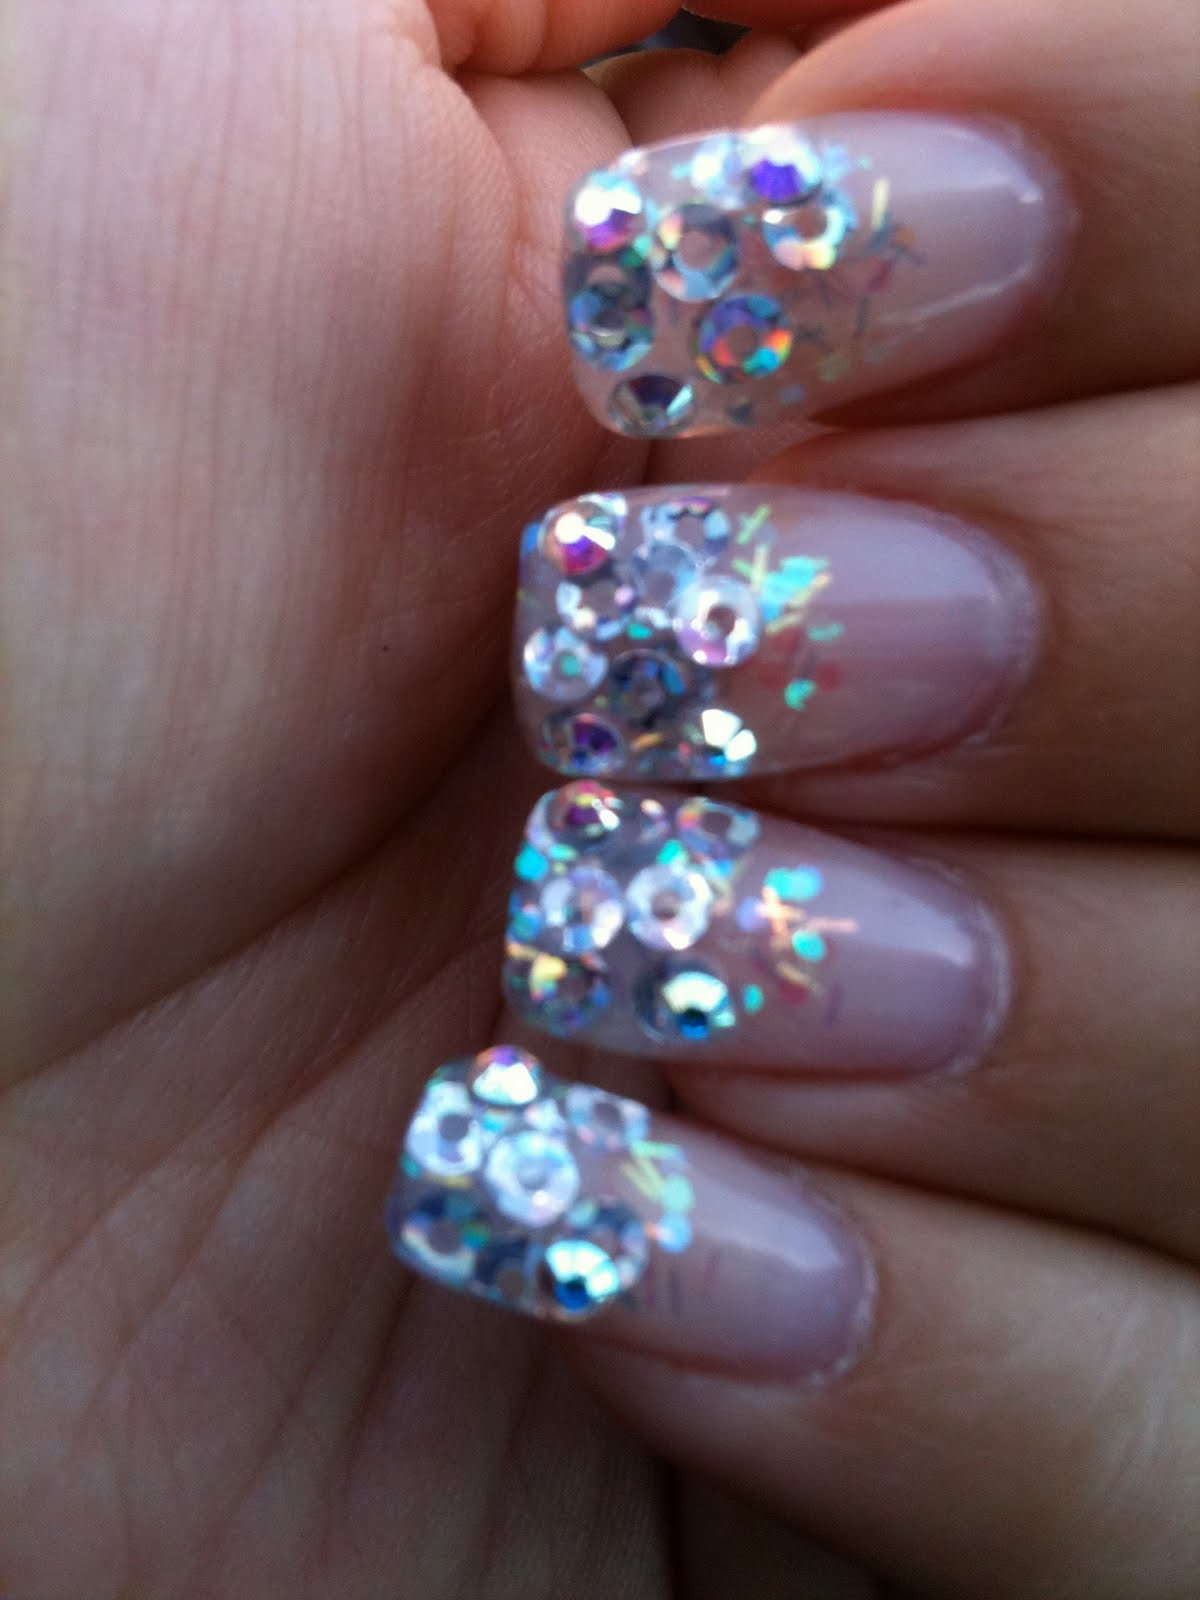 Acrylic Nails With Glitter Tips
 Revampy Glitter Tips